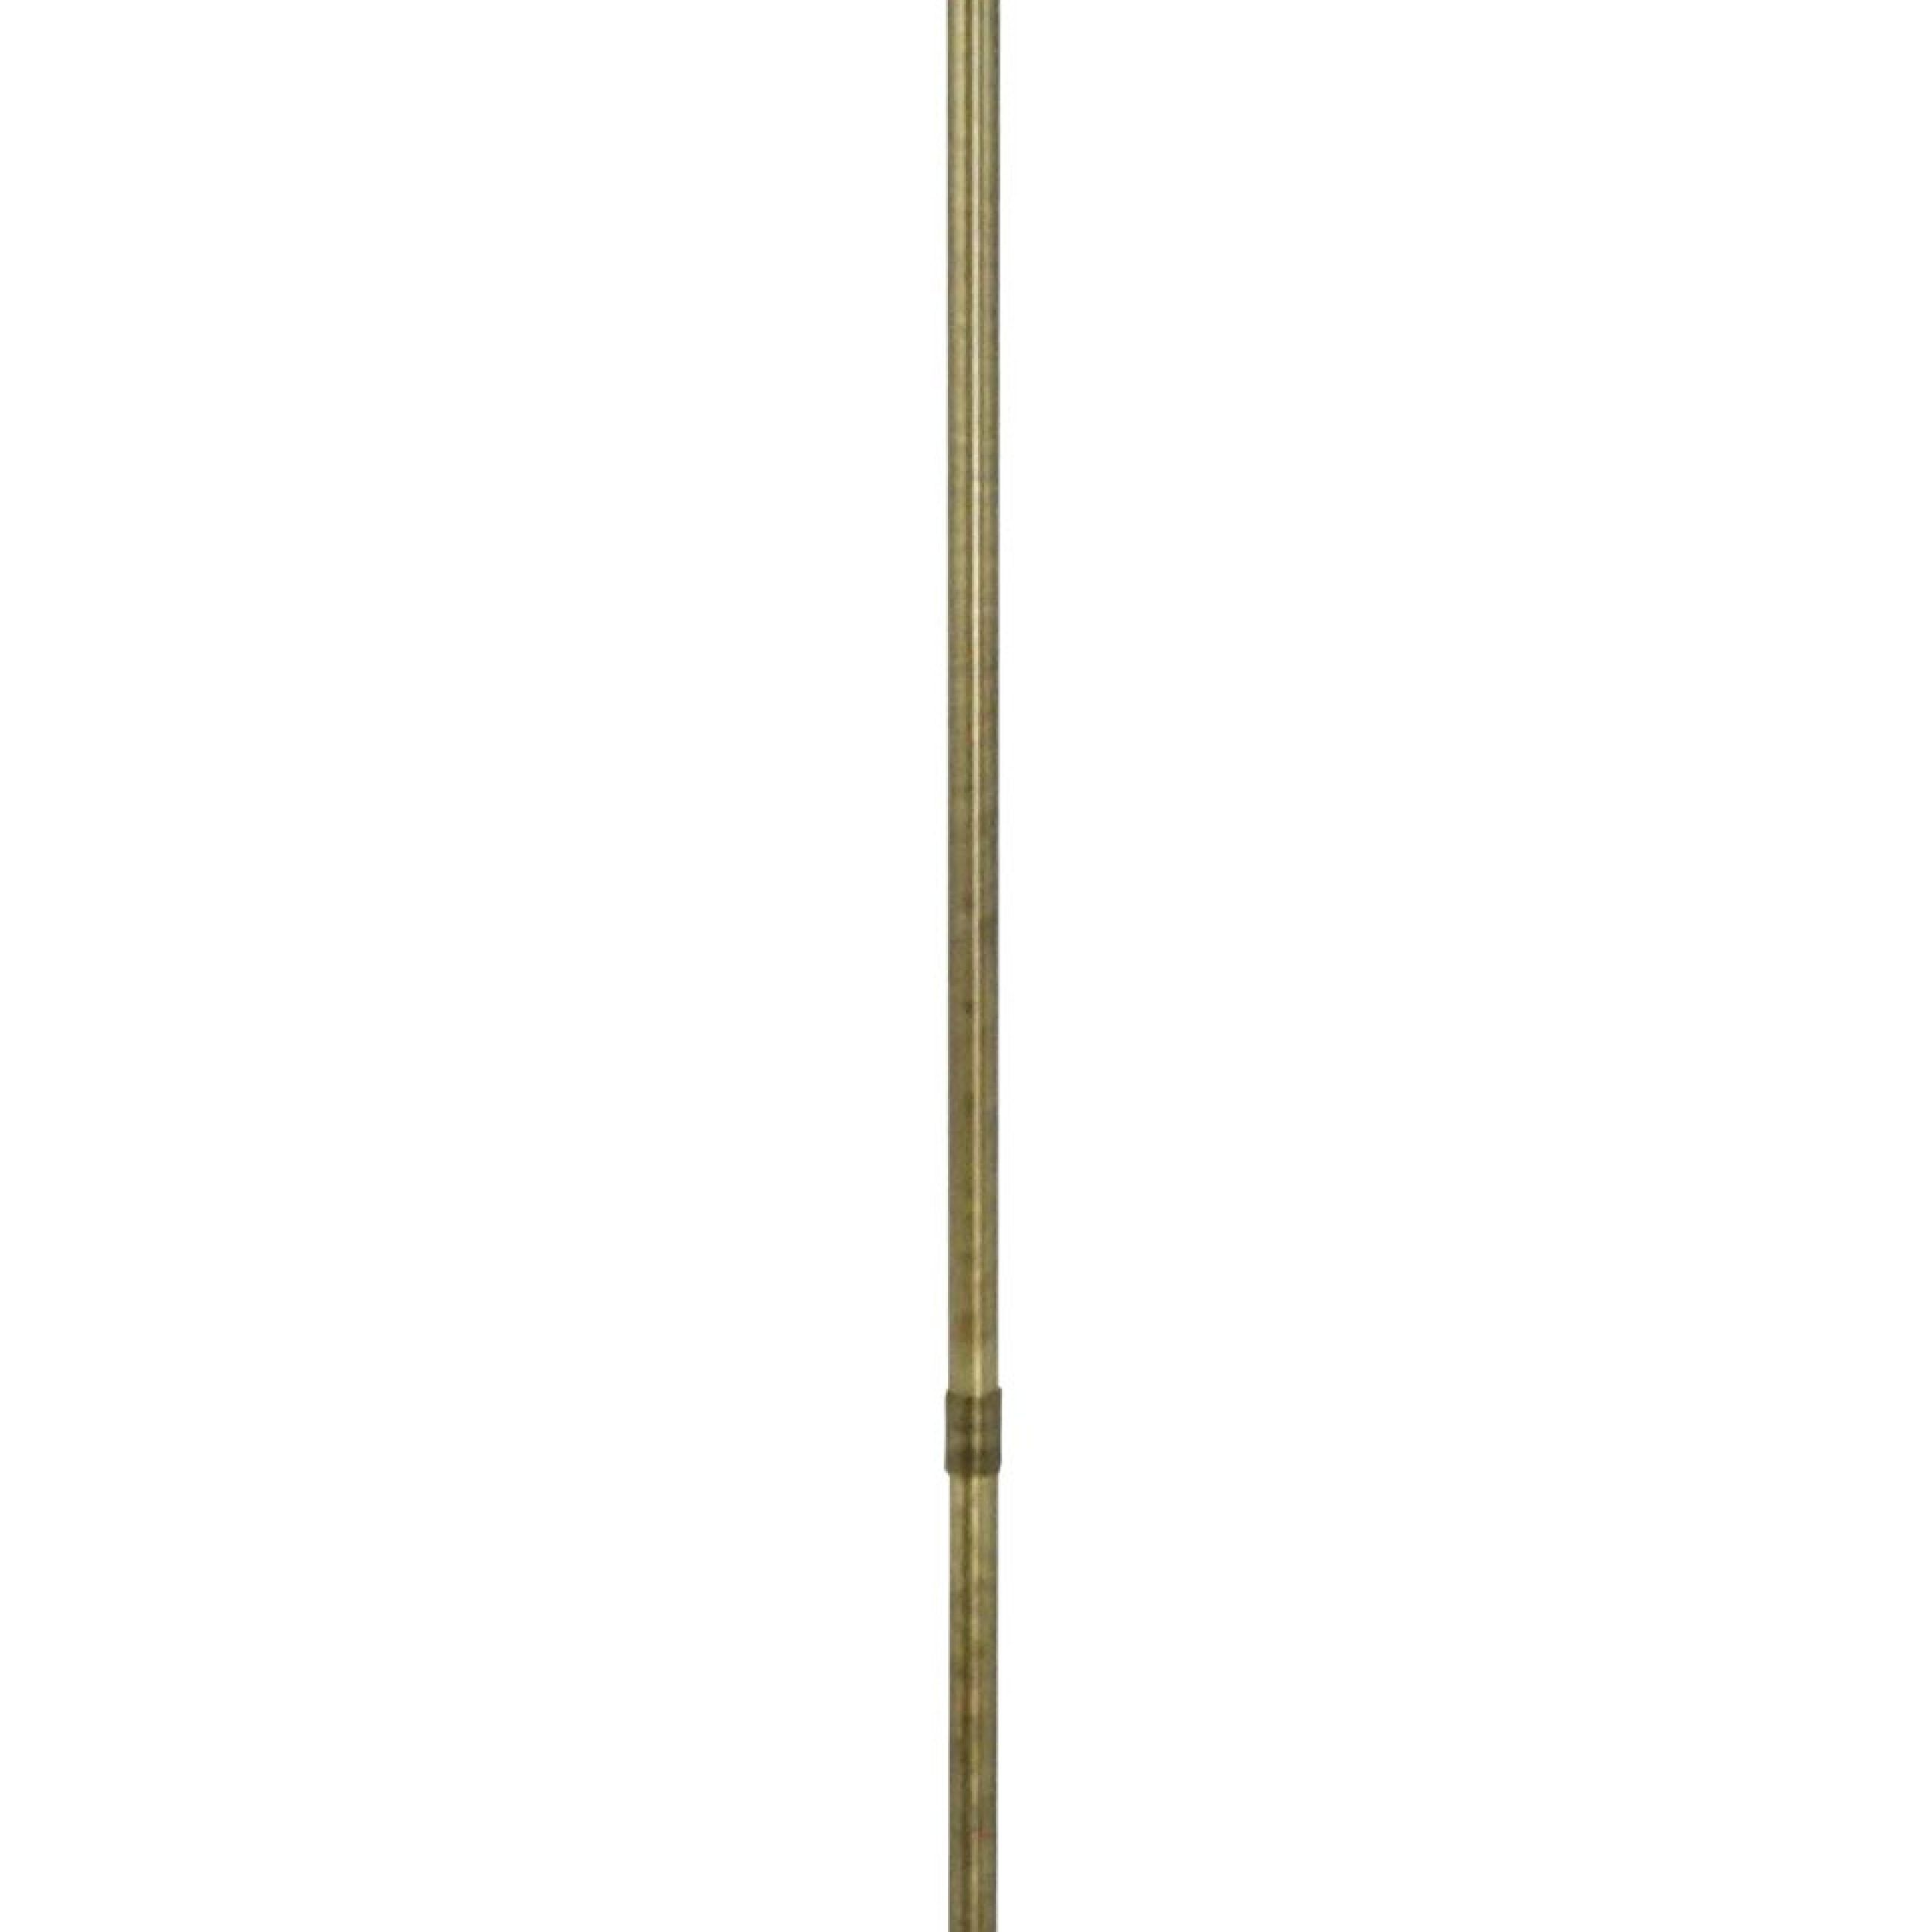 Cordless Standing Lamps In Best And Newest Kuma Gold Plated Battery Powered Floor Lamp – Réf (View 5 of 15)